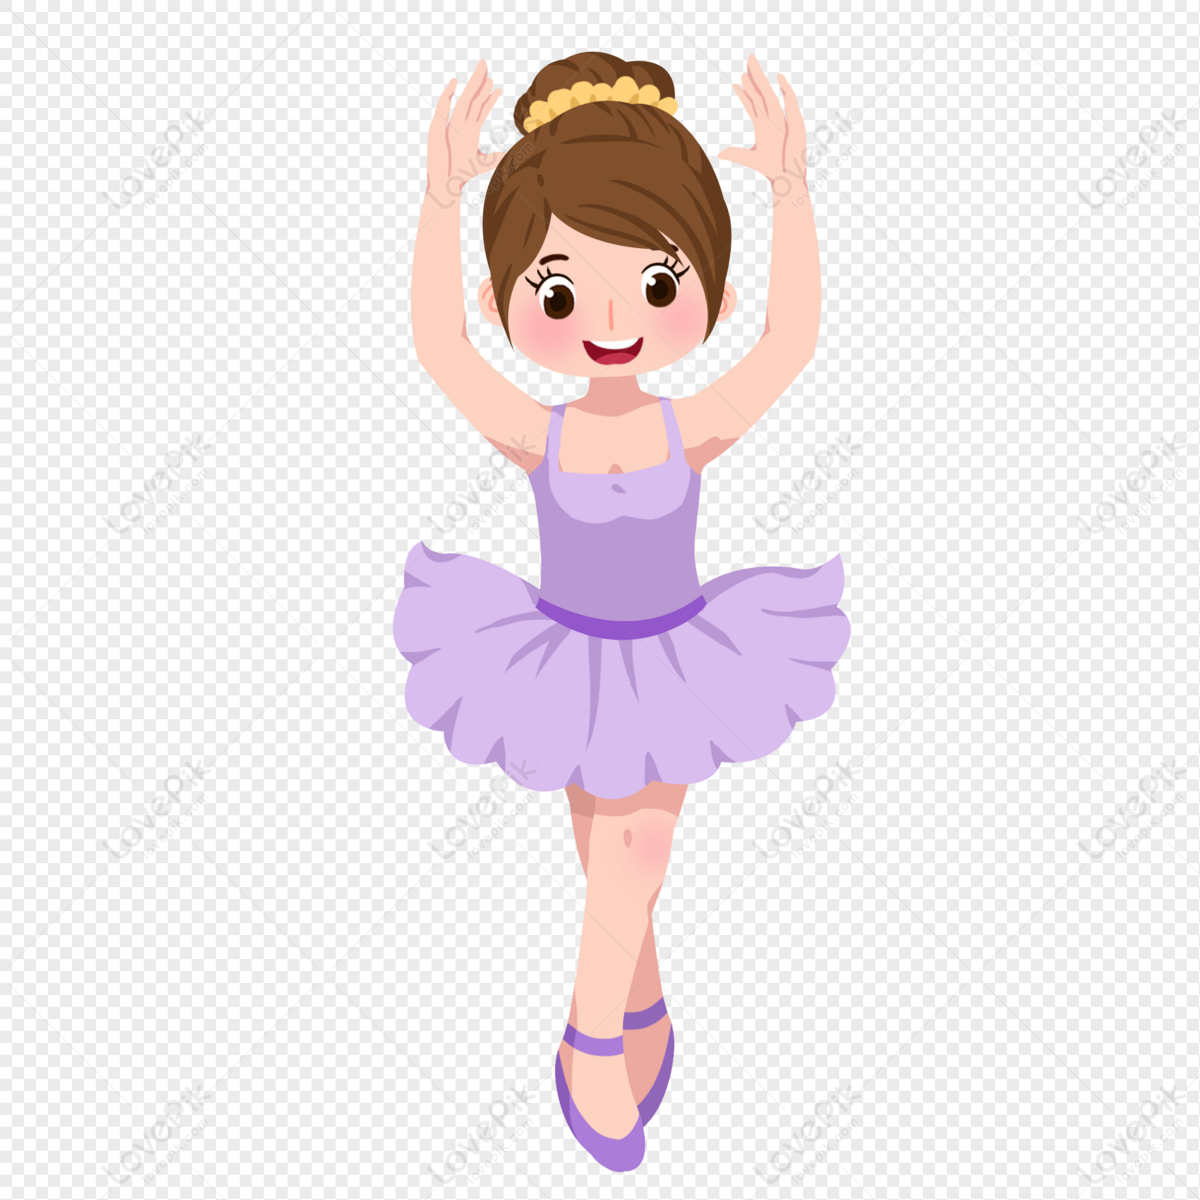 Cartoon Ballerina Girl PNG Free Download And Clipart Image For Free  Download - Lovepik | 401480173